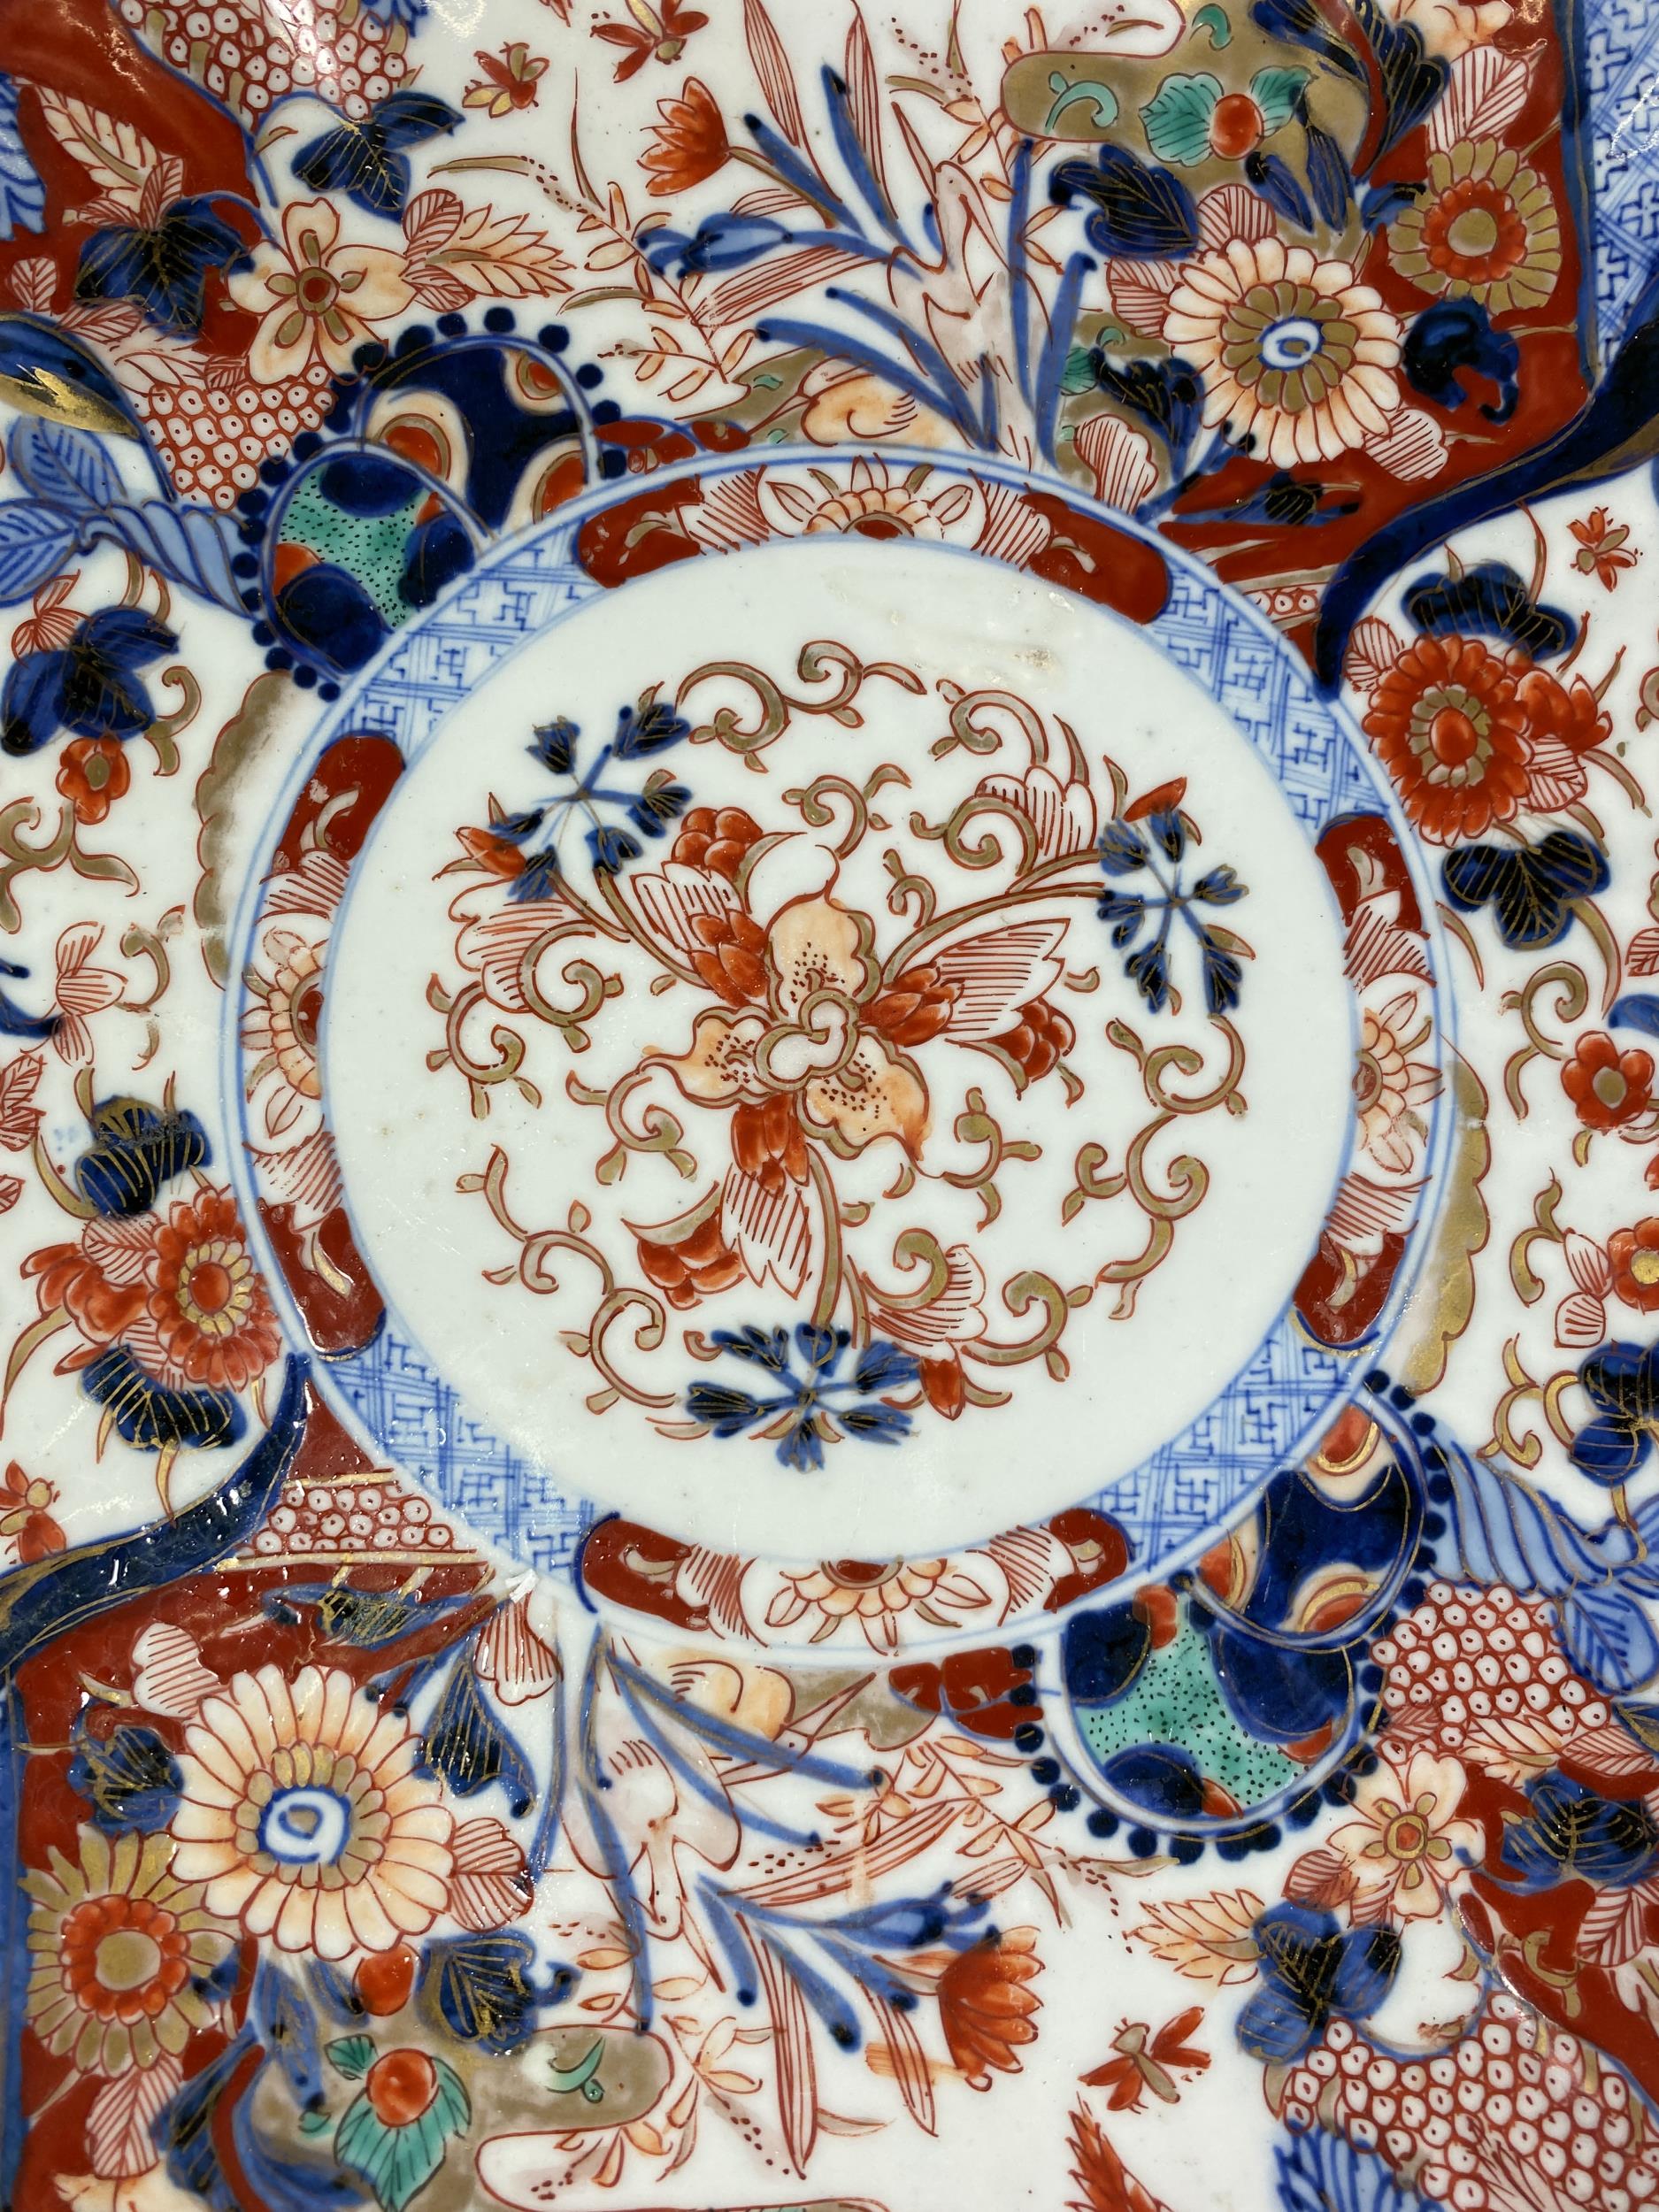 AN UNUSUAL SQUARE FORM JAPANESE MEIJI PERIOD (1868-1912) IMARI HAND PAINTED CHARGER 27.5CM - Image 2 of 3